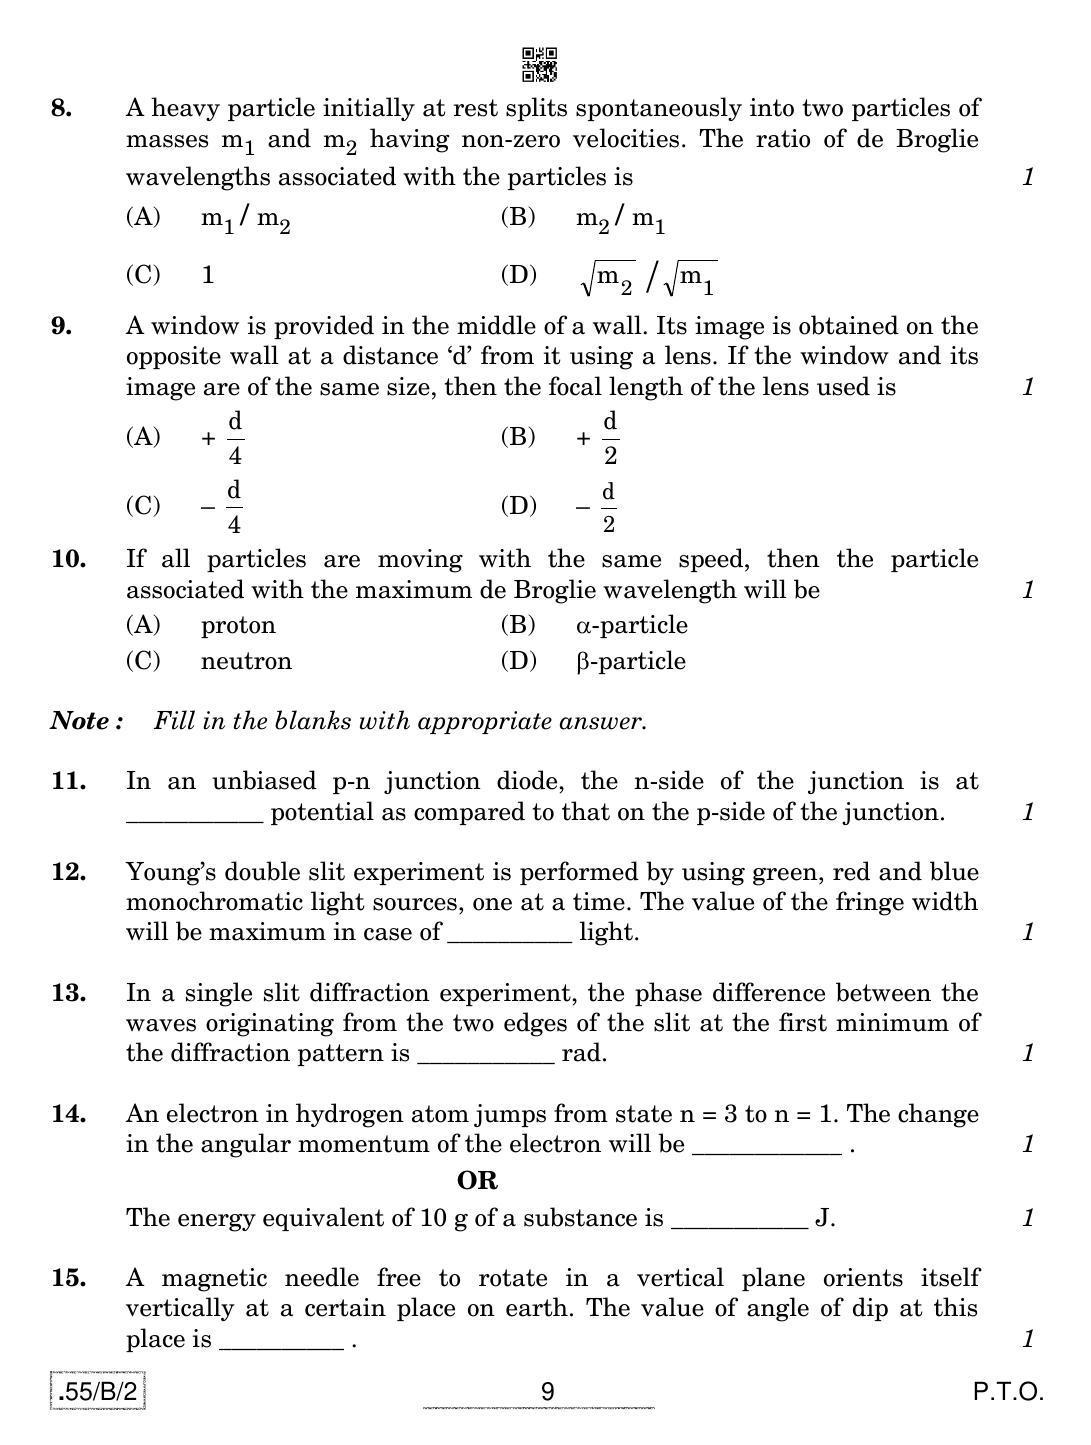 CBSE Class 12 55-C-2 - Physics 2020 Compartment Question Paper - Page 9